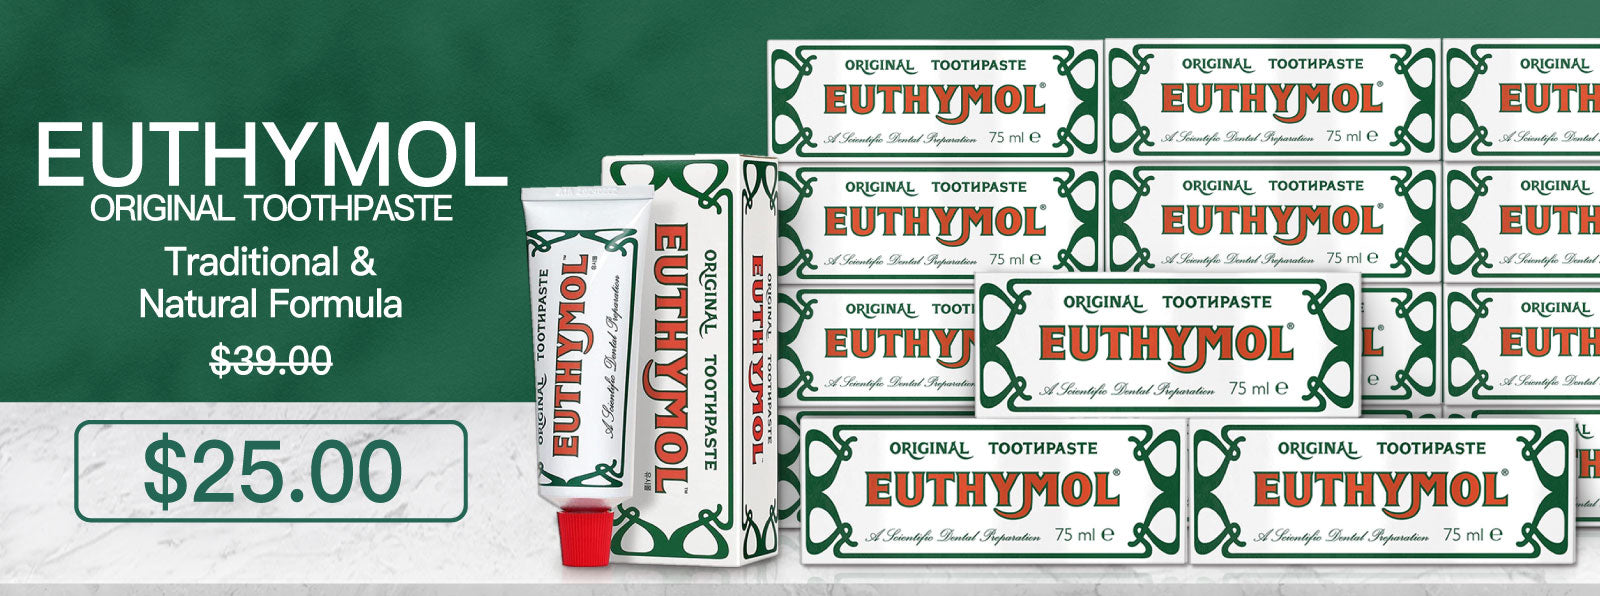 Spot On's special offer for Euthymol Original Toothpaste